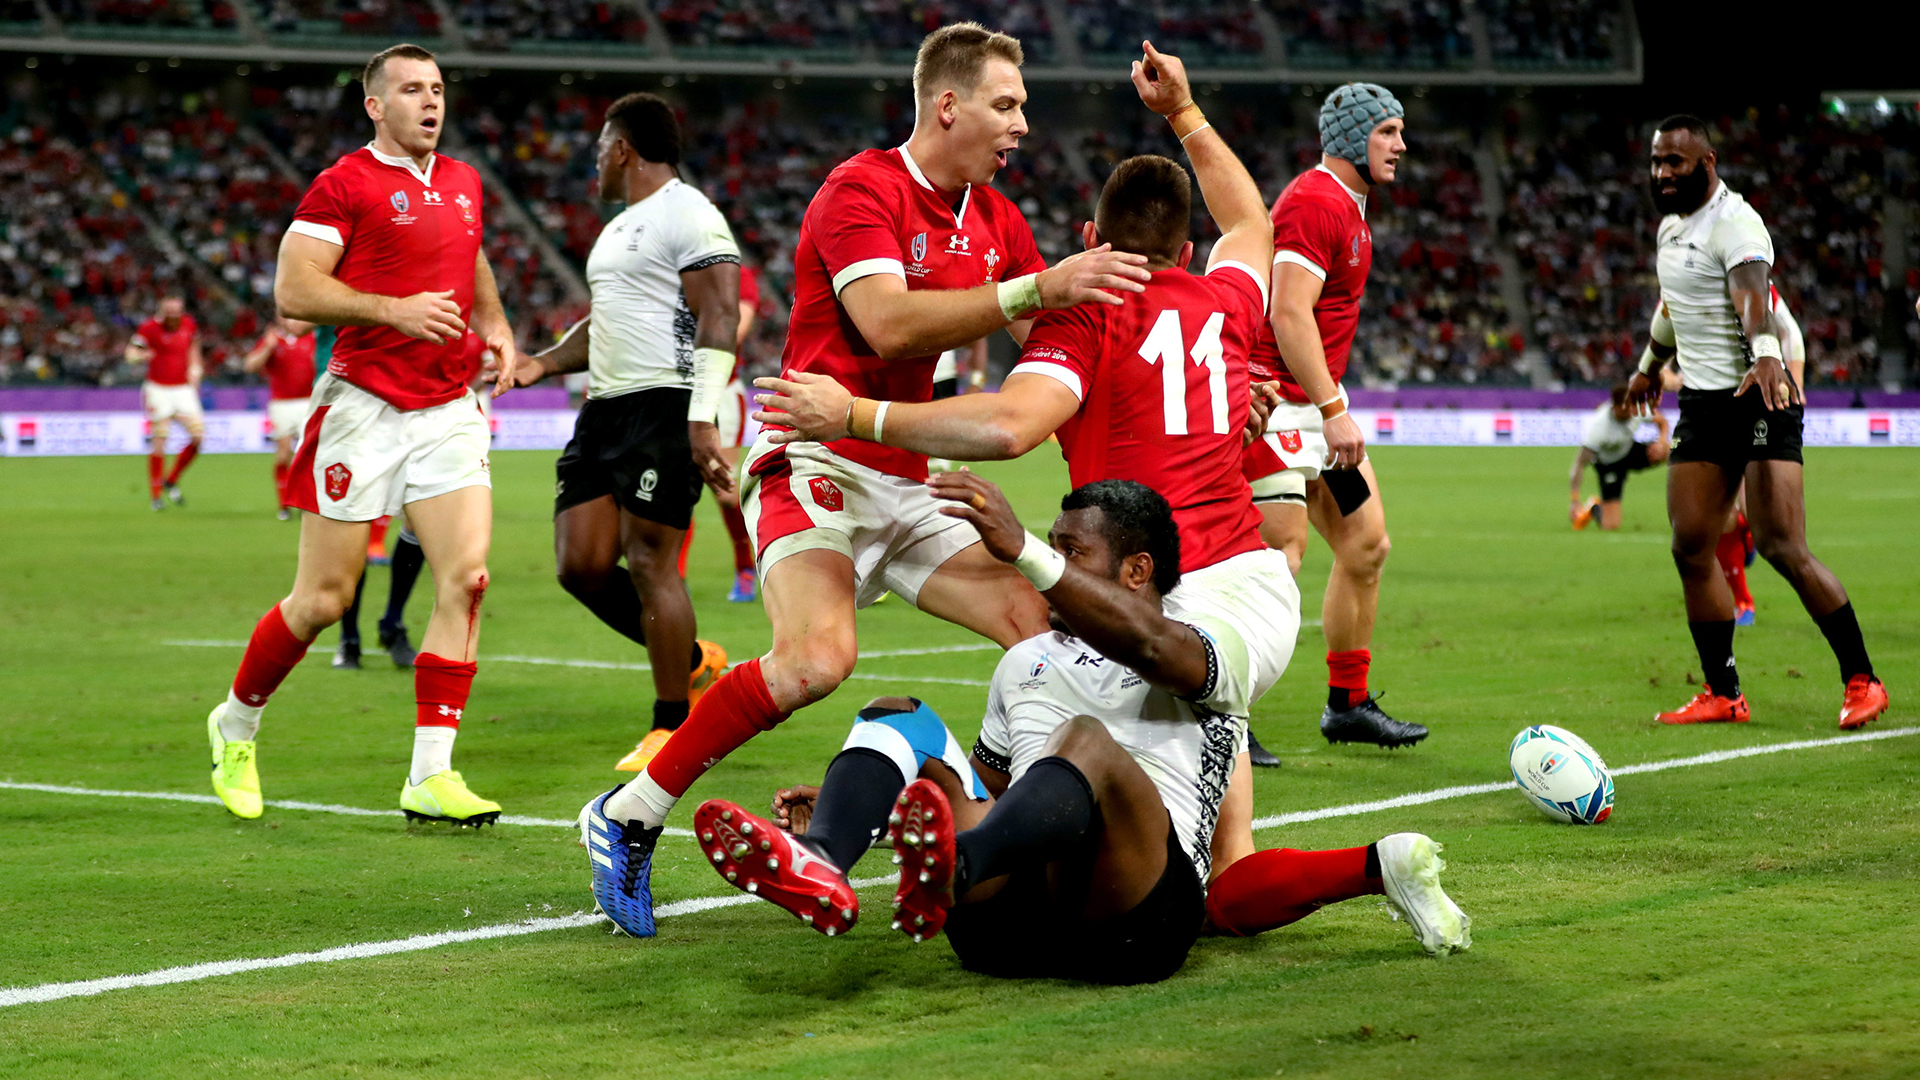 Wales 29-17 Fiji Rugby World Cup match report, highlights and scorers